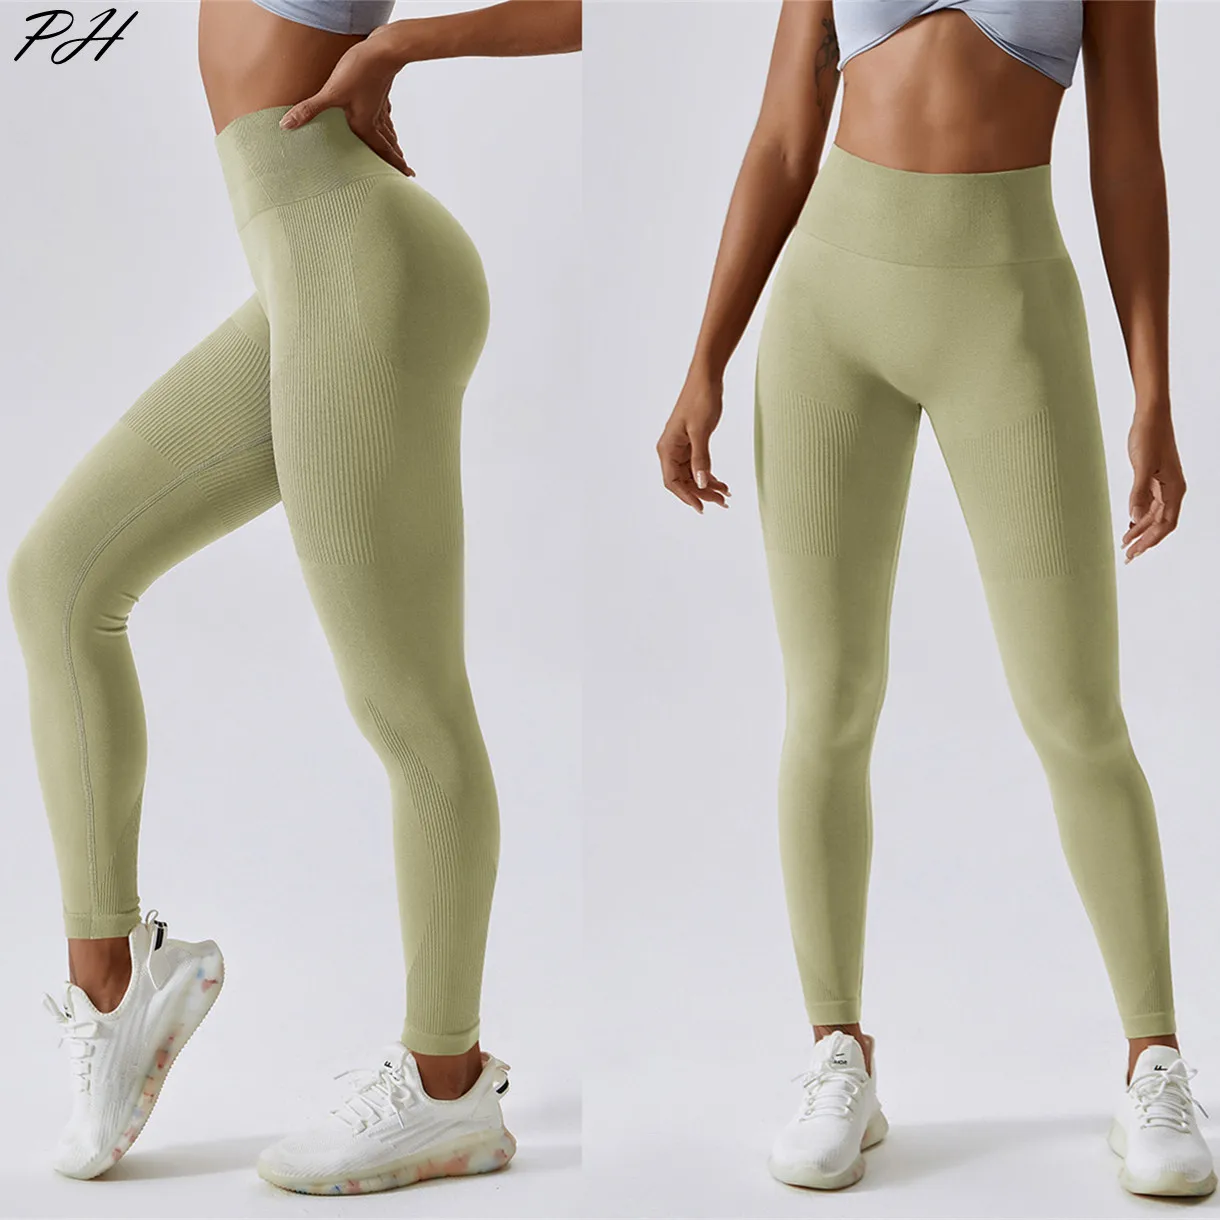 

Seamless Yoga Leggings Gym Women Push Up Booty High Waist Legging Workout Tights Fitness Yoga Pants Stretchy Sport Trouser